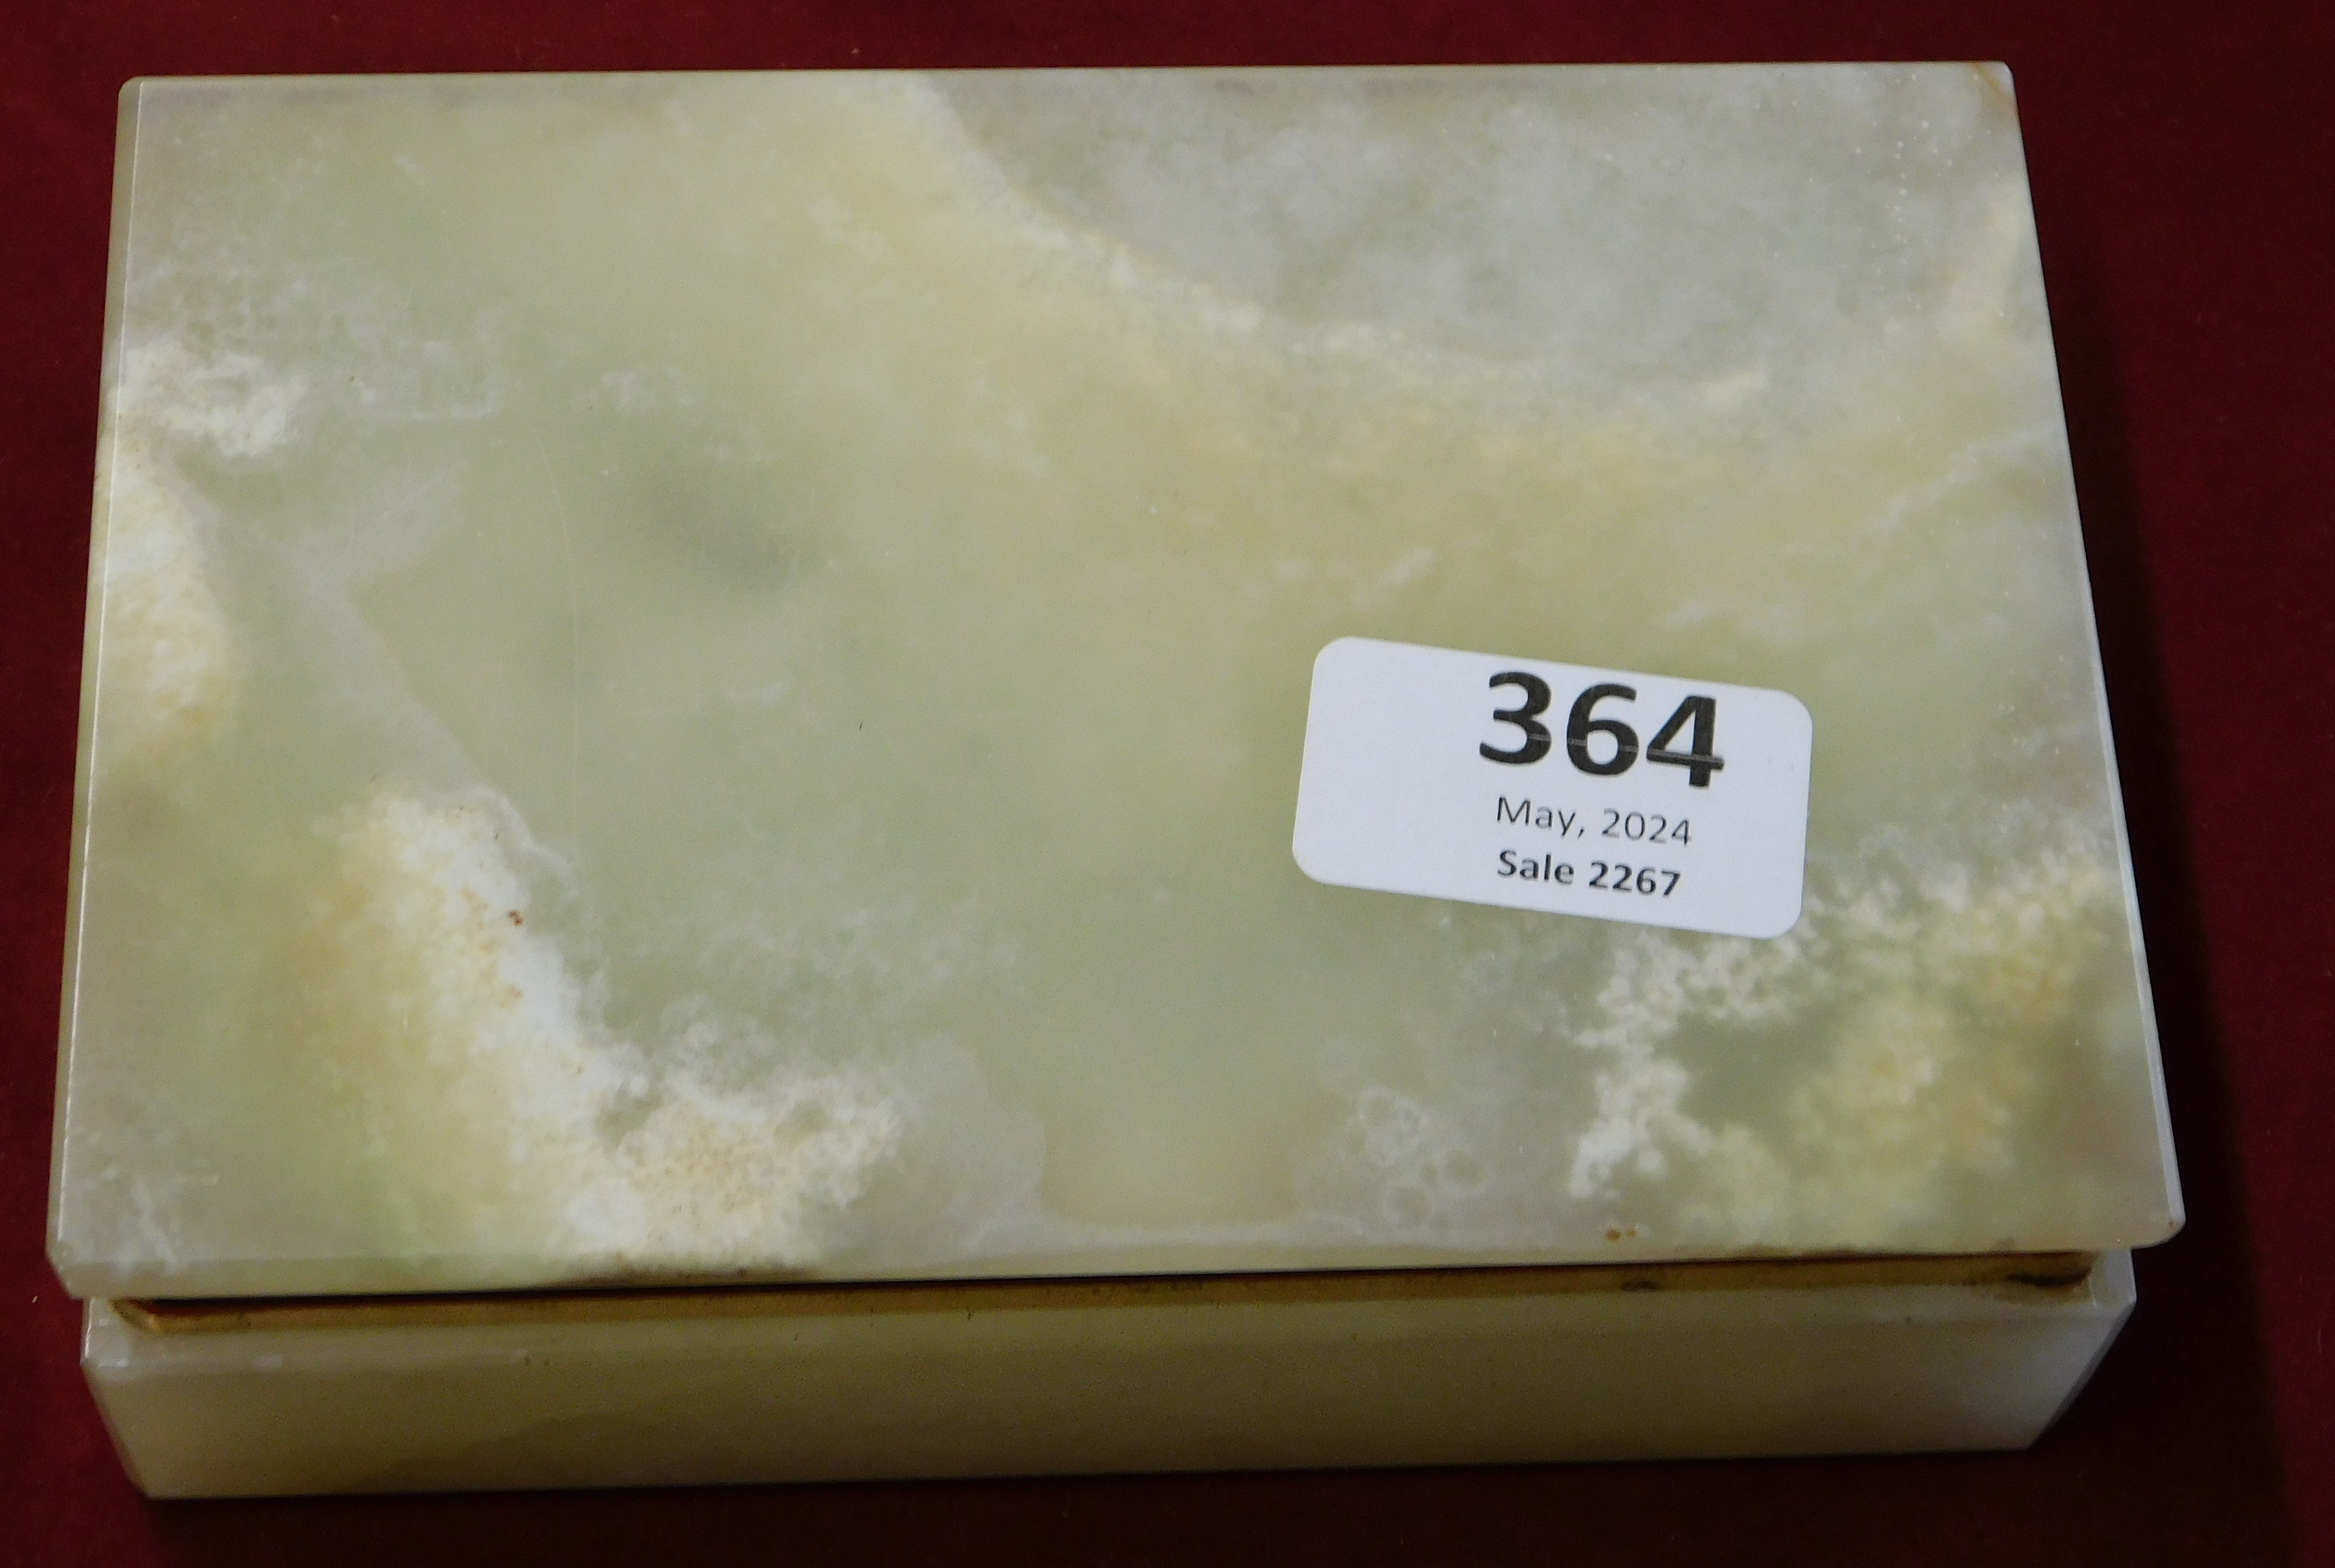 A green onyx cigarette case and lighter inscribed "Many thanks from Denis Law" Manchester United v - Image 2 of 4